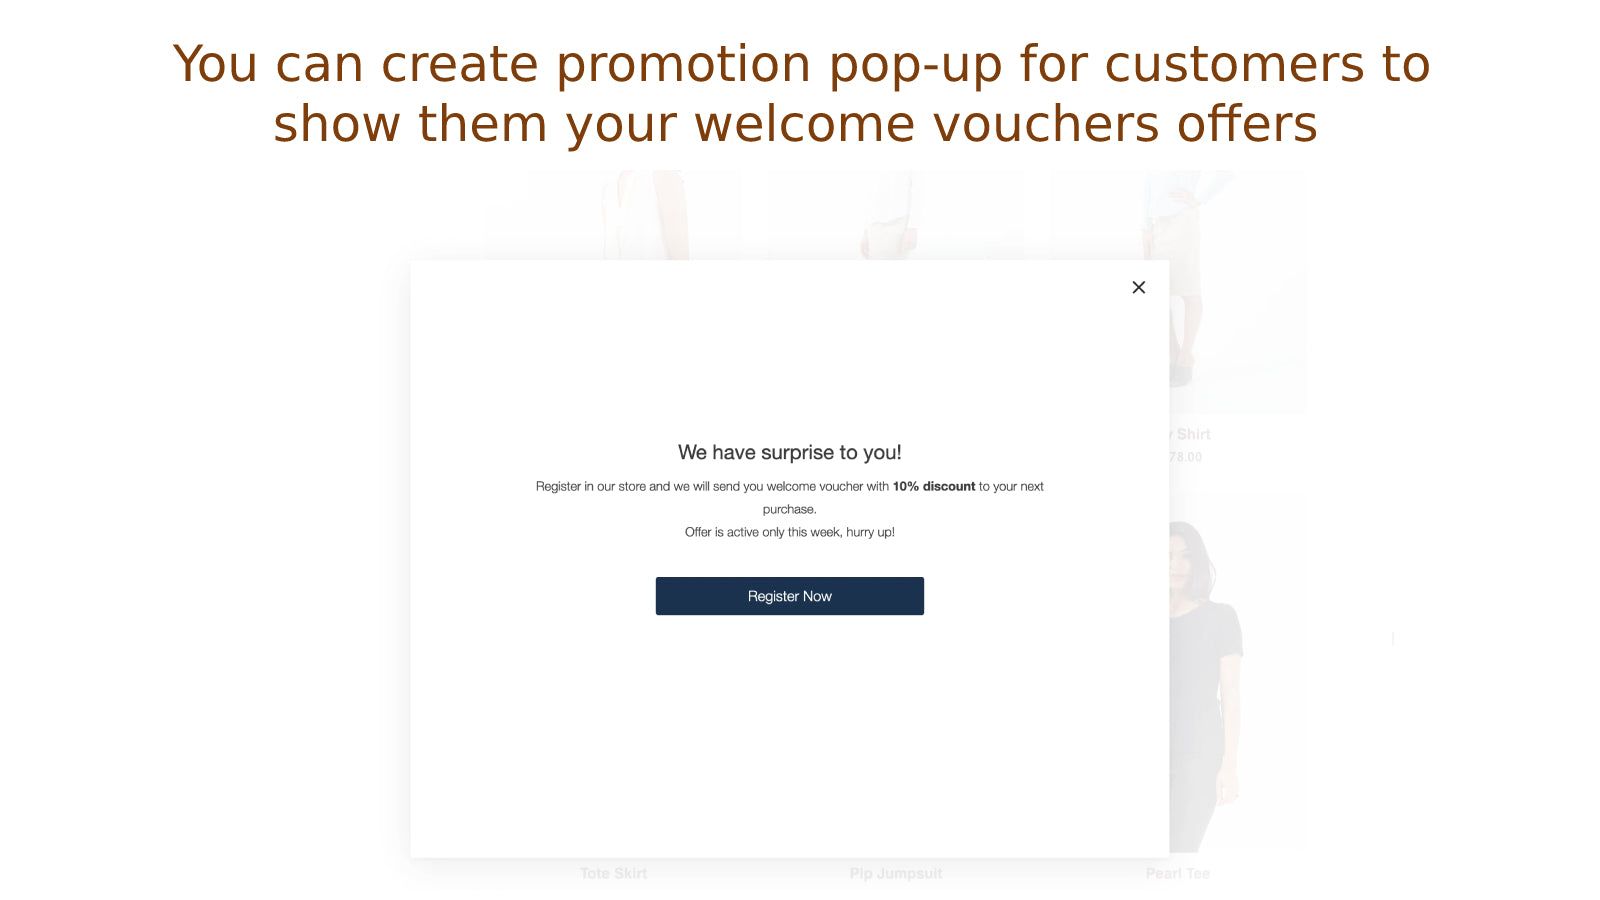 Promotion pop-up for customers to show them your offers